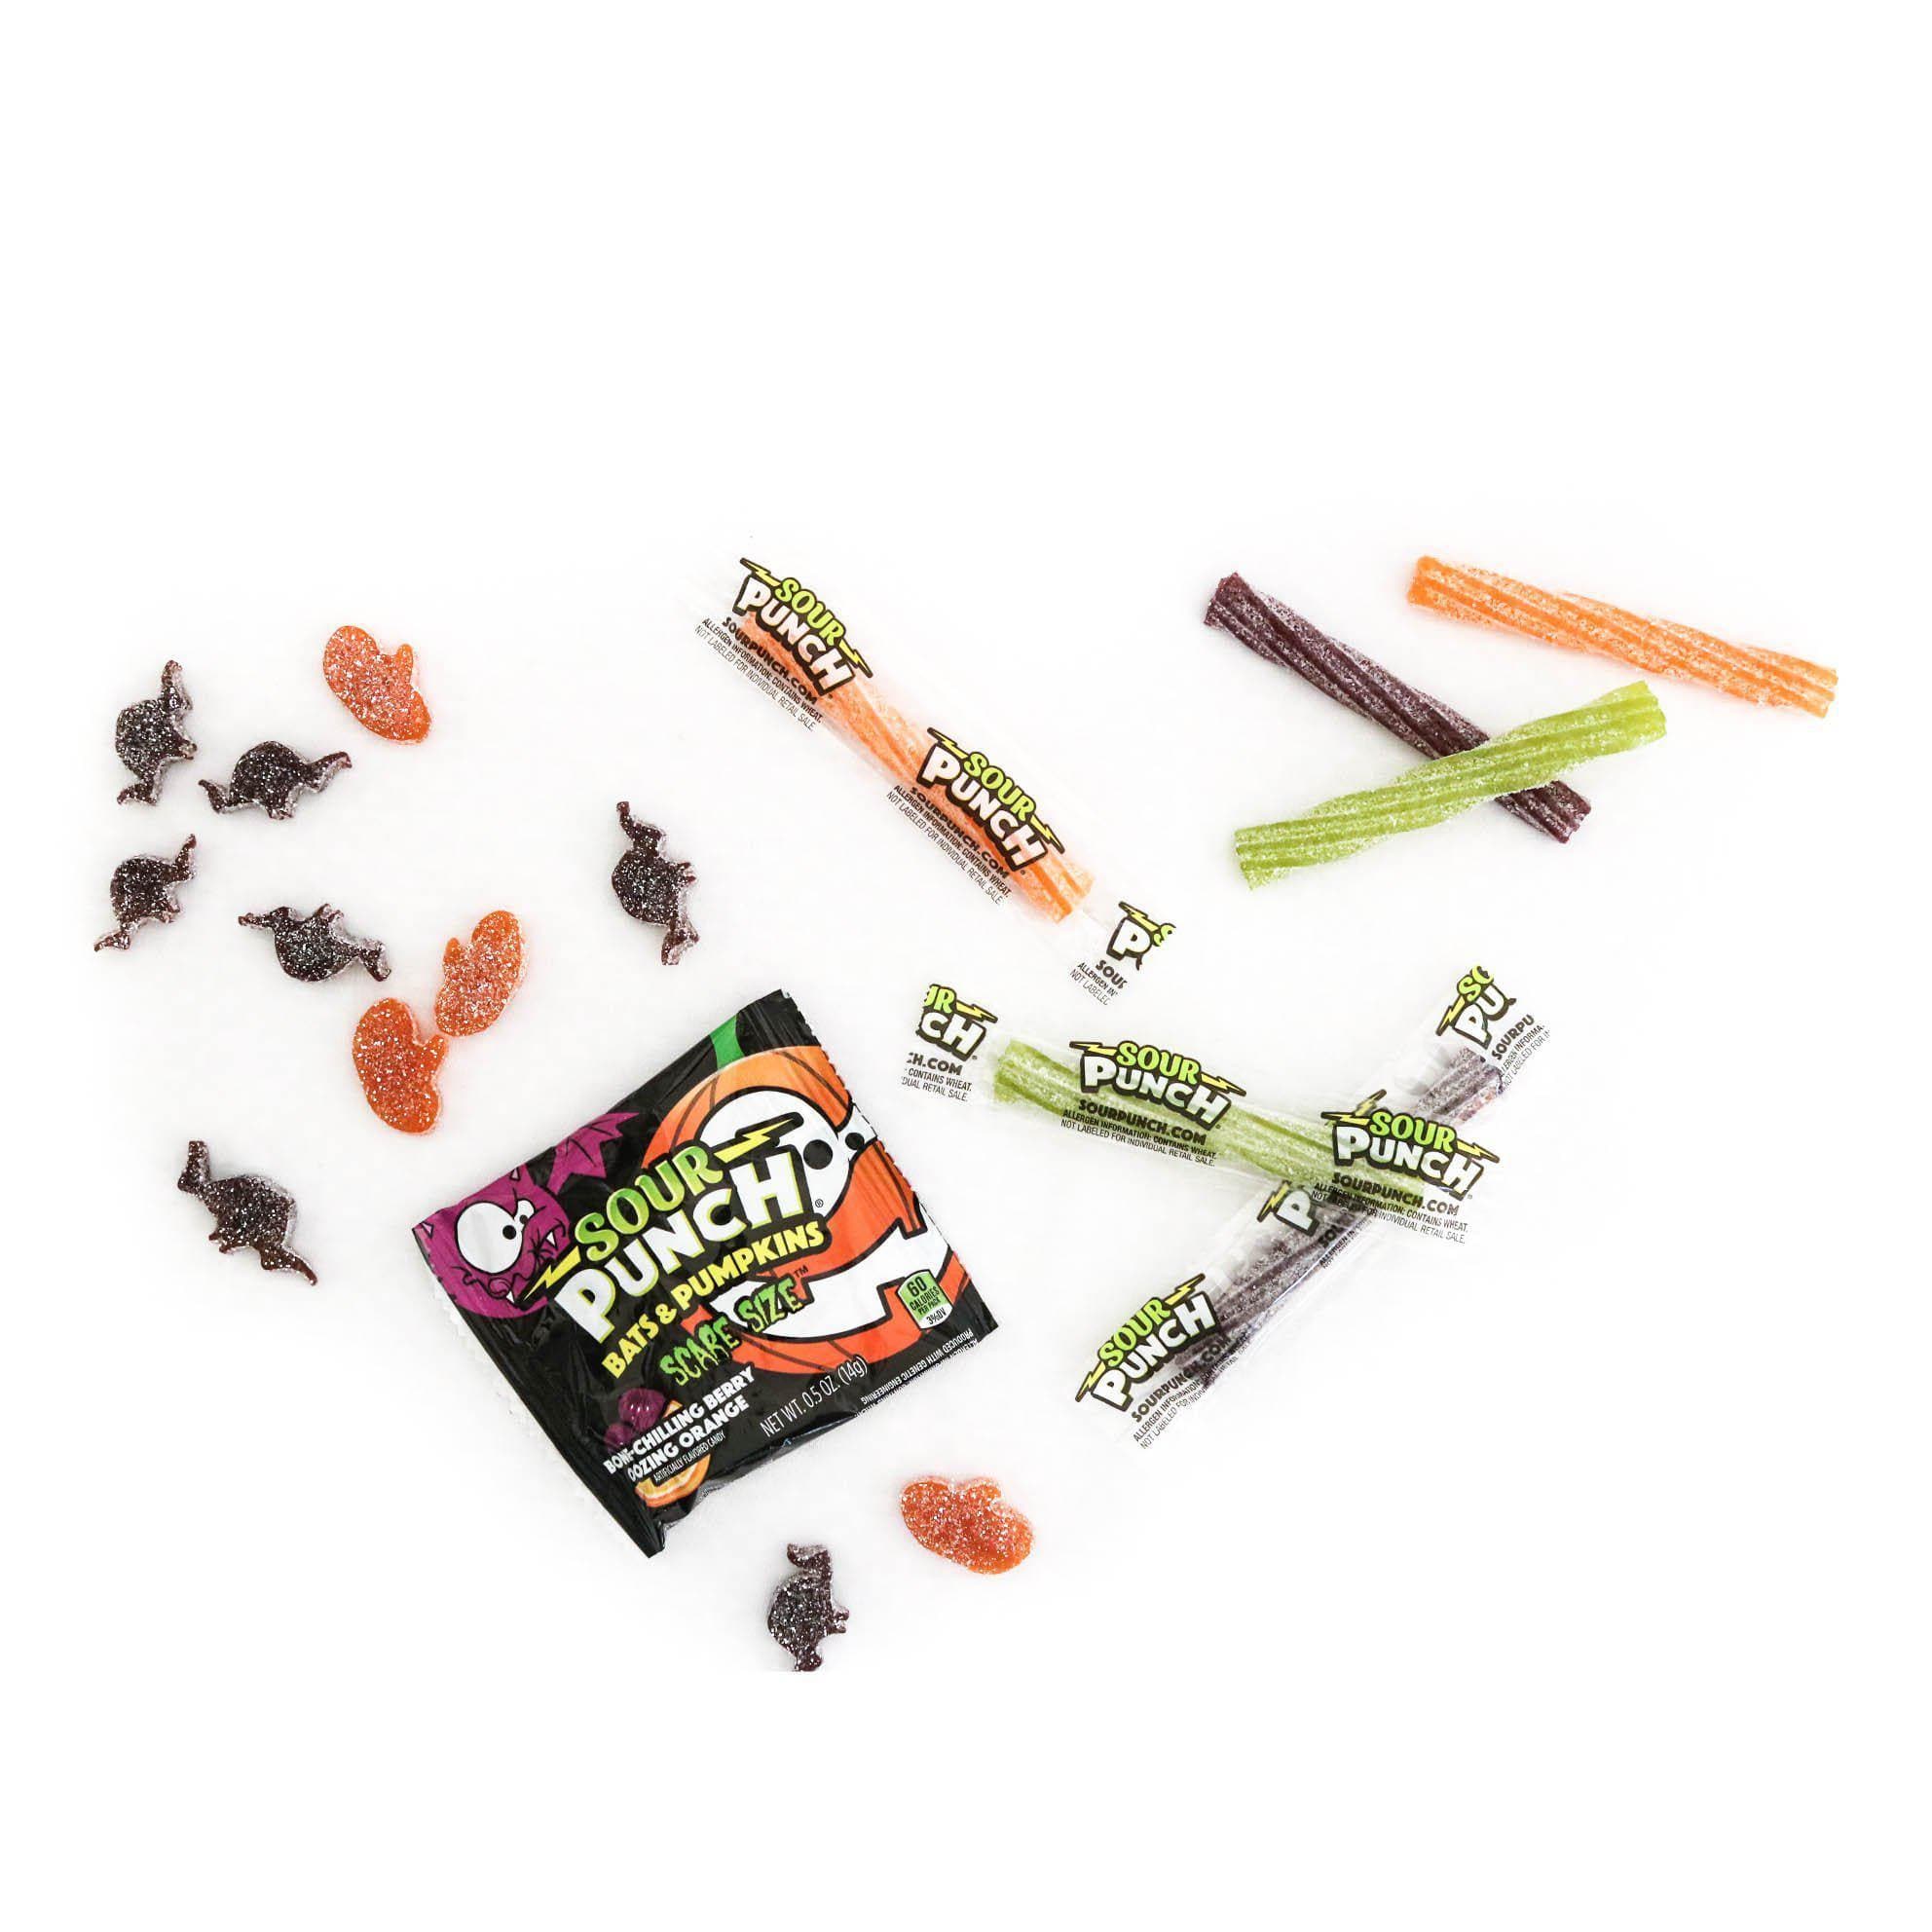 SOUR PUNCH Halloween Candy - Individually Wrapped Candy Twists and Bats & Pumpkins Candy Pouches